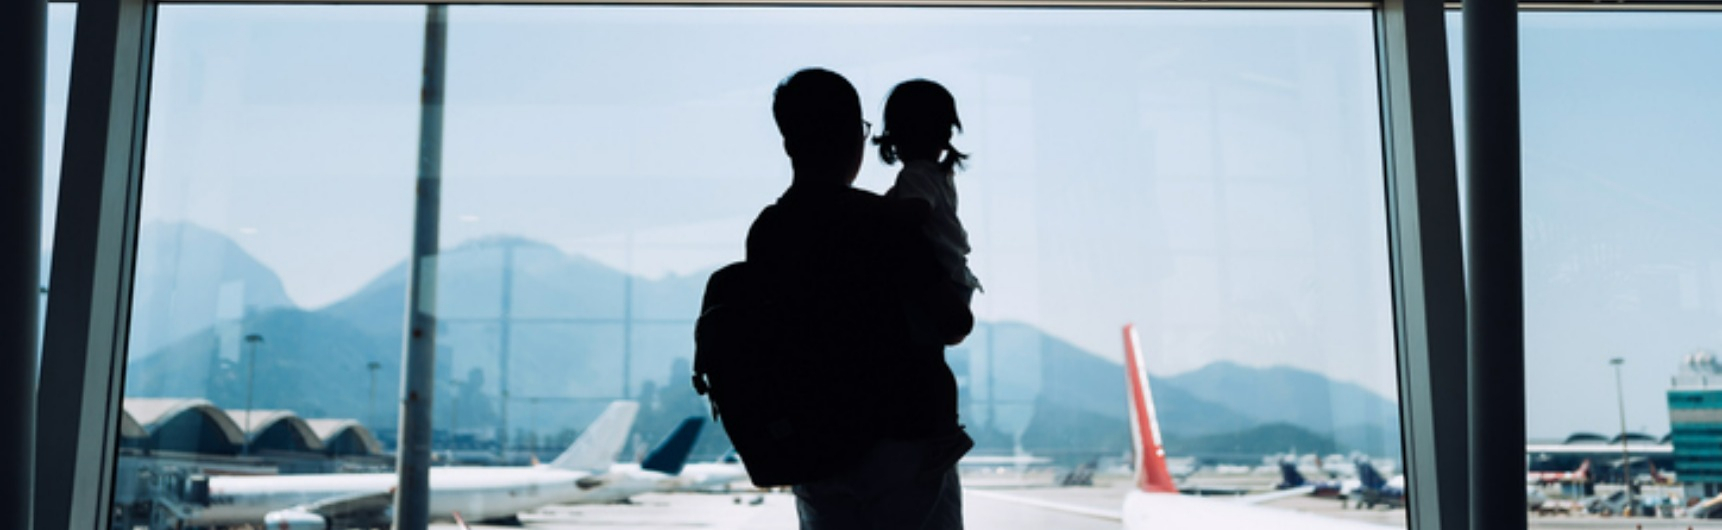 Parent and child in airport gate